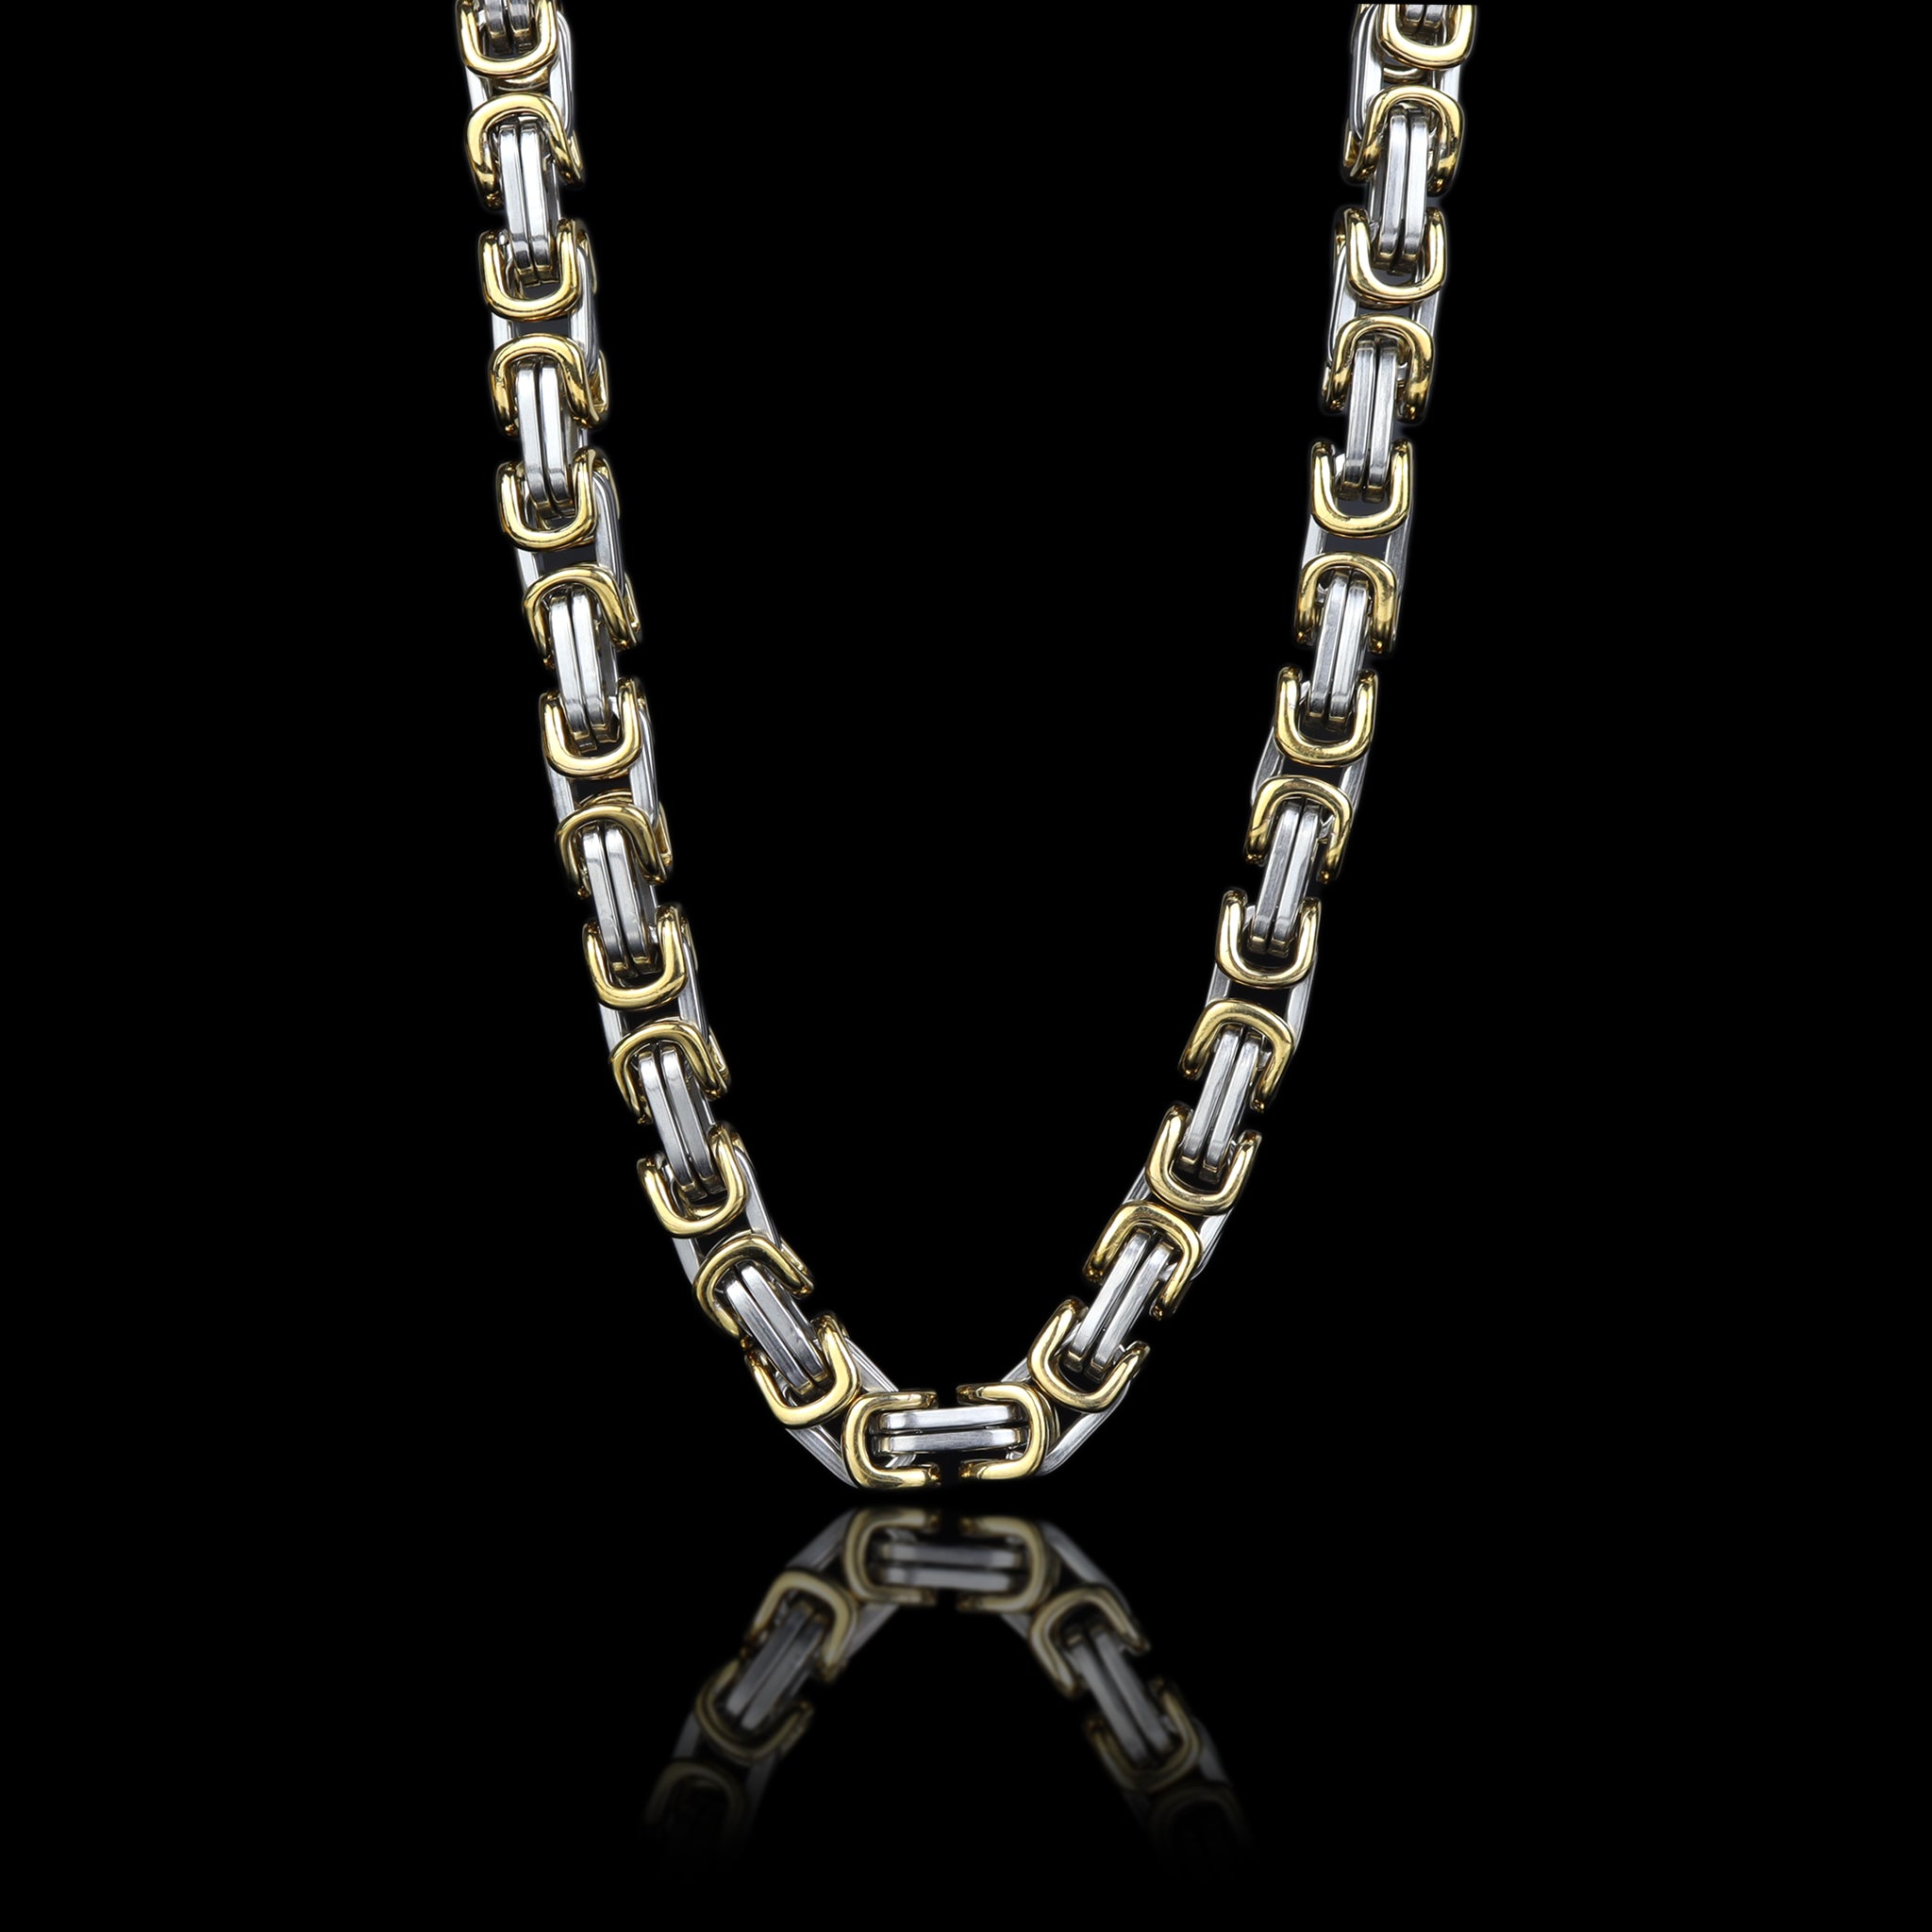 Byzantine18K Gold Plated Stainless Steel Chains Necklace 14in - 32in Men